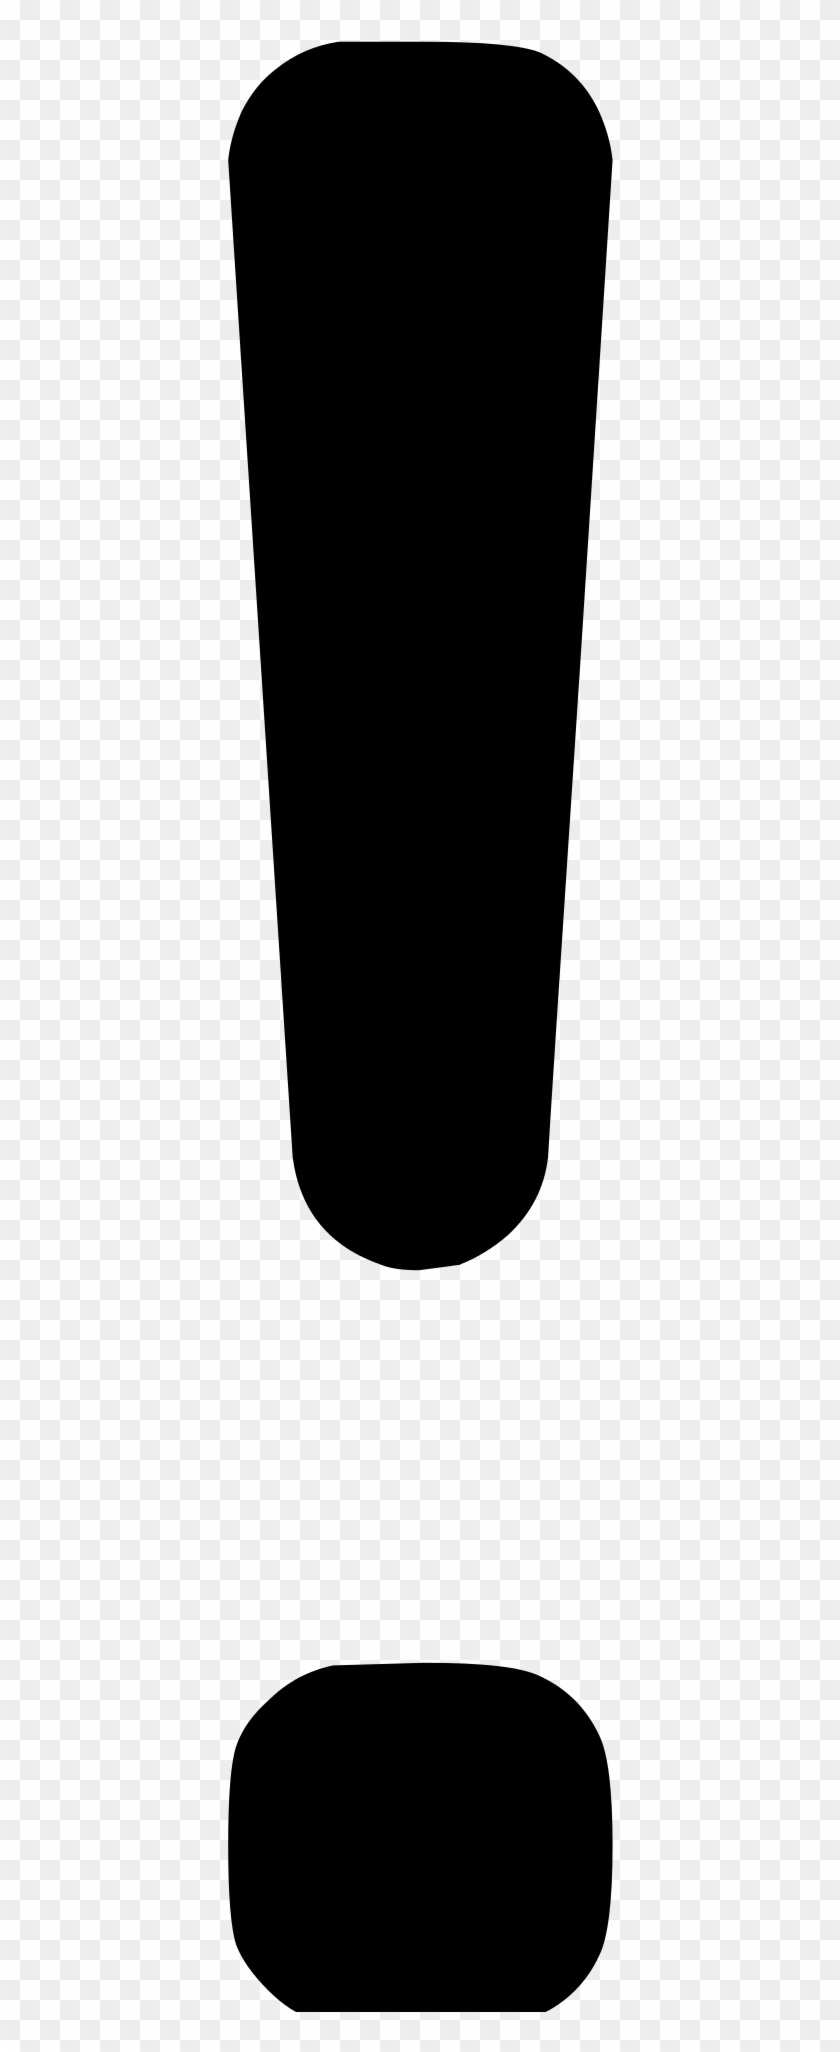 Exclamation Mark Png - Clip Art #908133